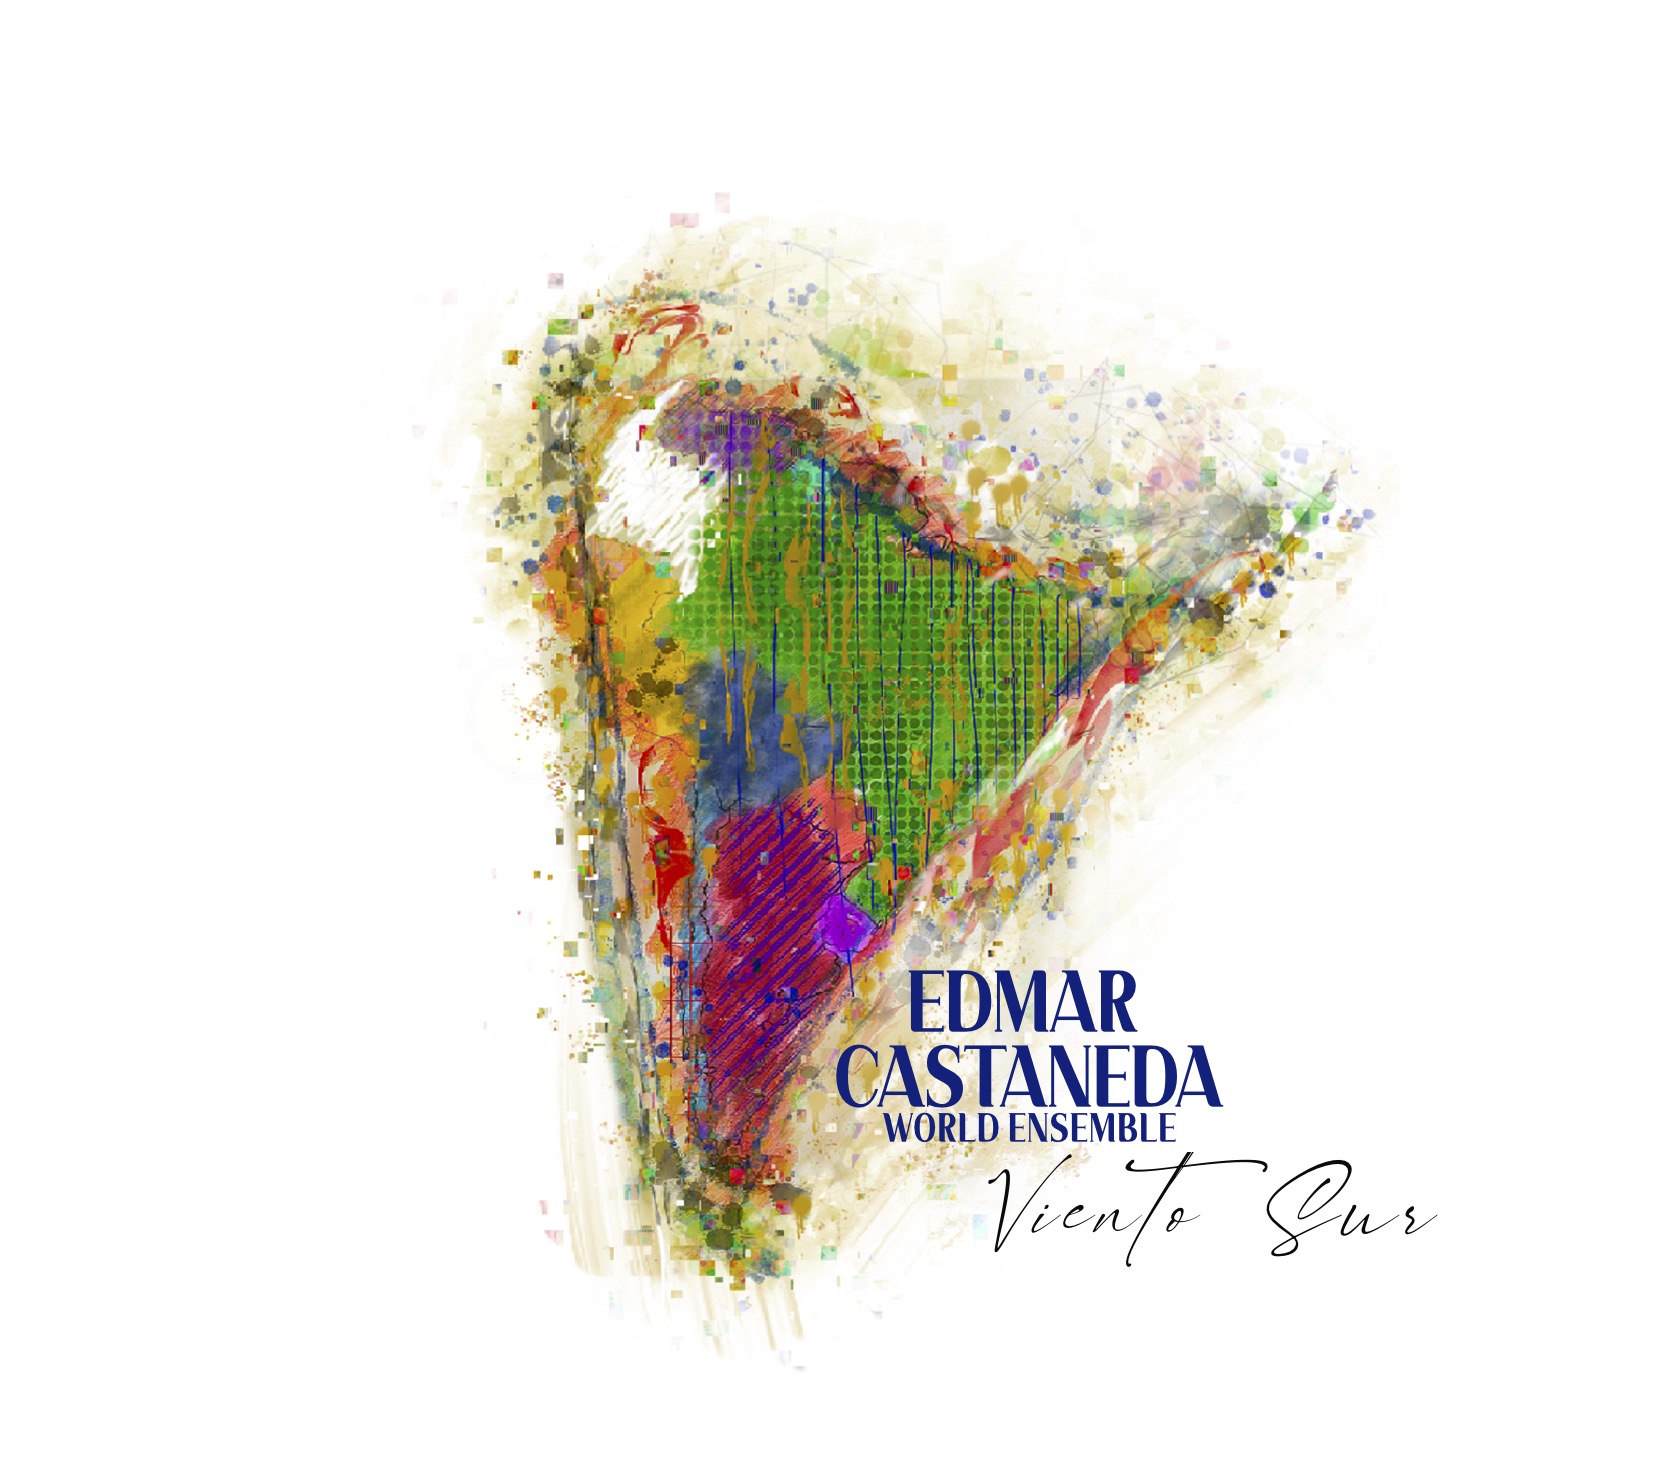 Acclaimed Virtuoso Jazz Harpist Edmar Castañeda and His World Ensemble Feature Jazz Collaborations with Artists Spanning the Globe on New Studio Album